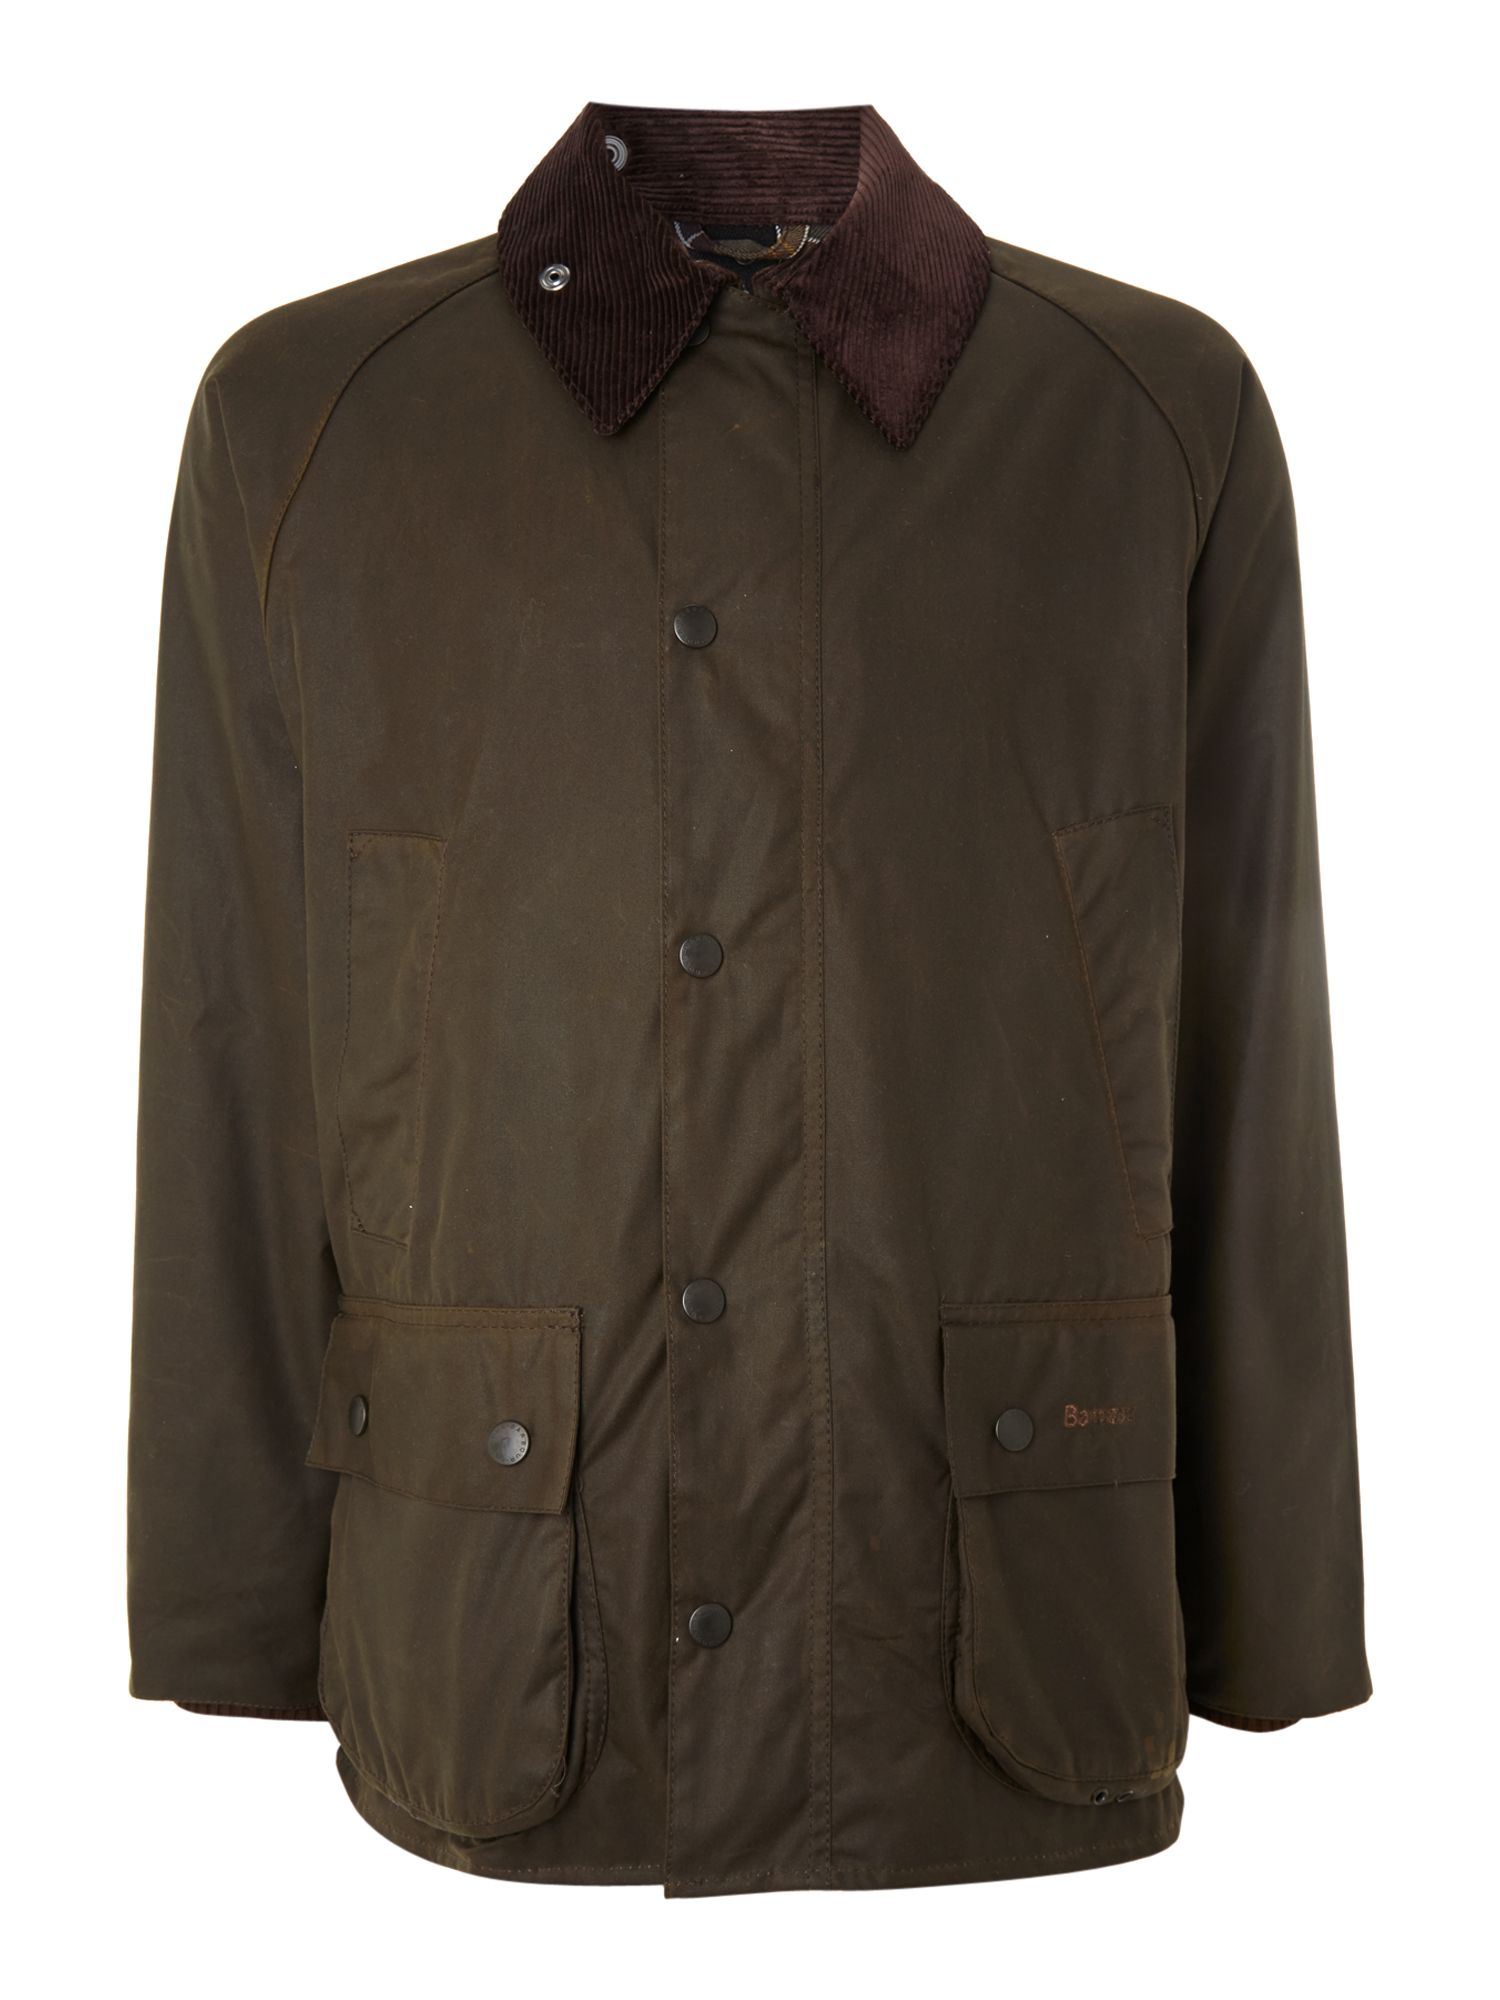 Barbour Classic Bedale Wax Jacket in Khaki for Men (Olive) | Lyst